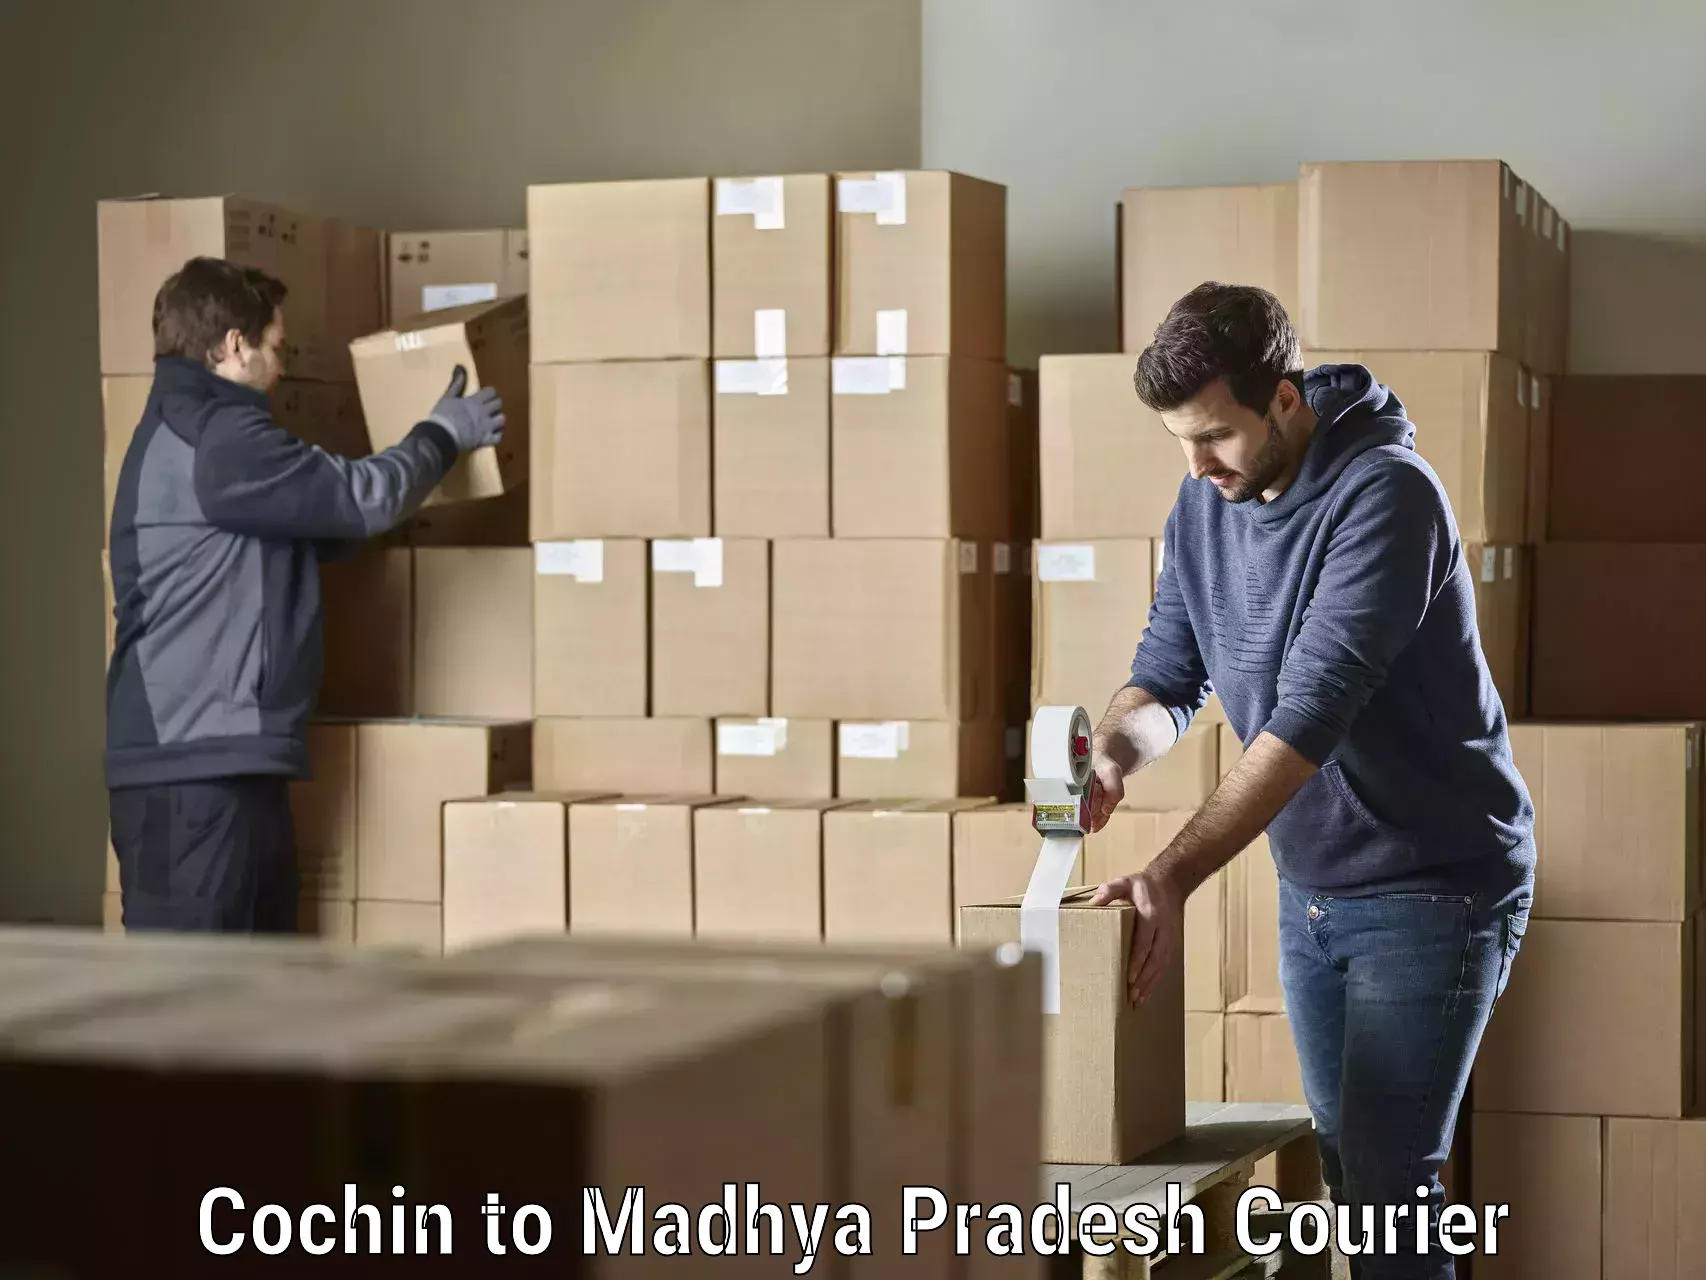 High-speed parcel service Cochin to Begumganj